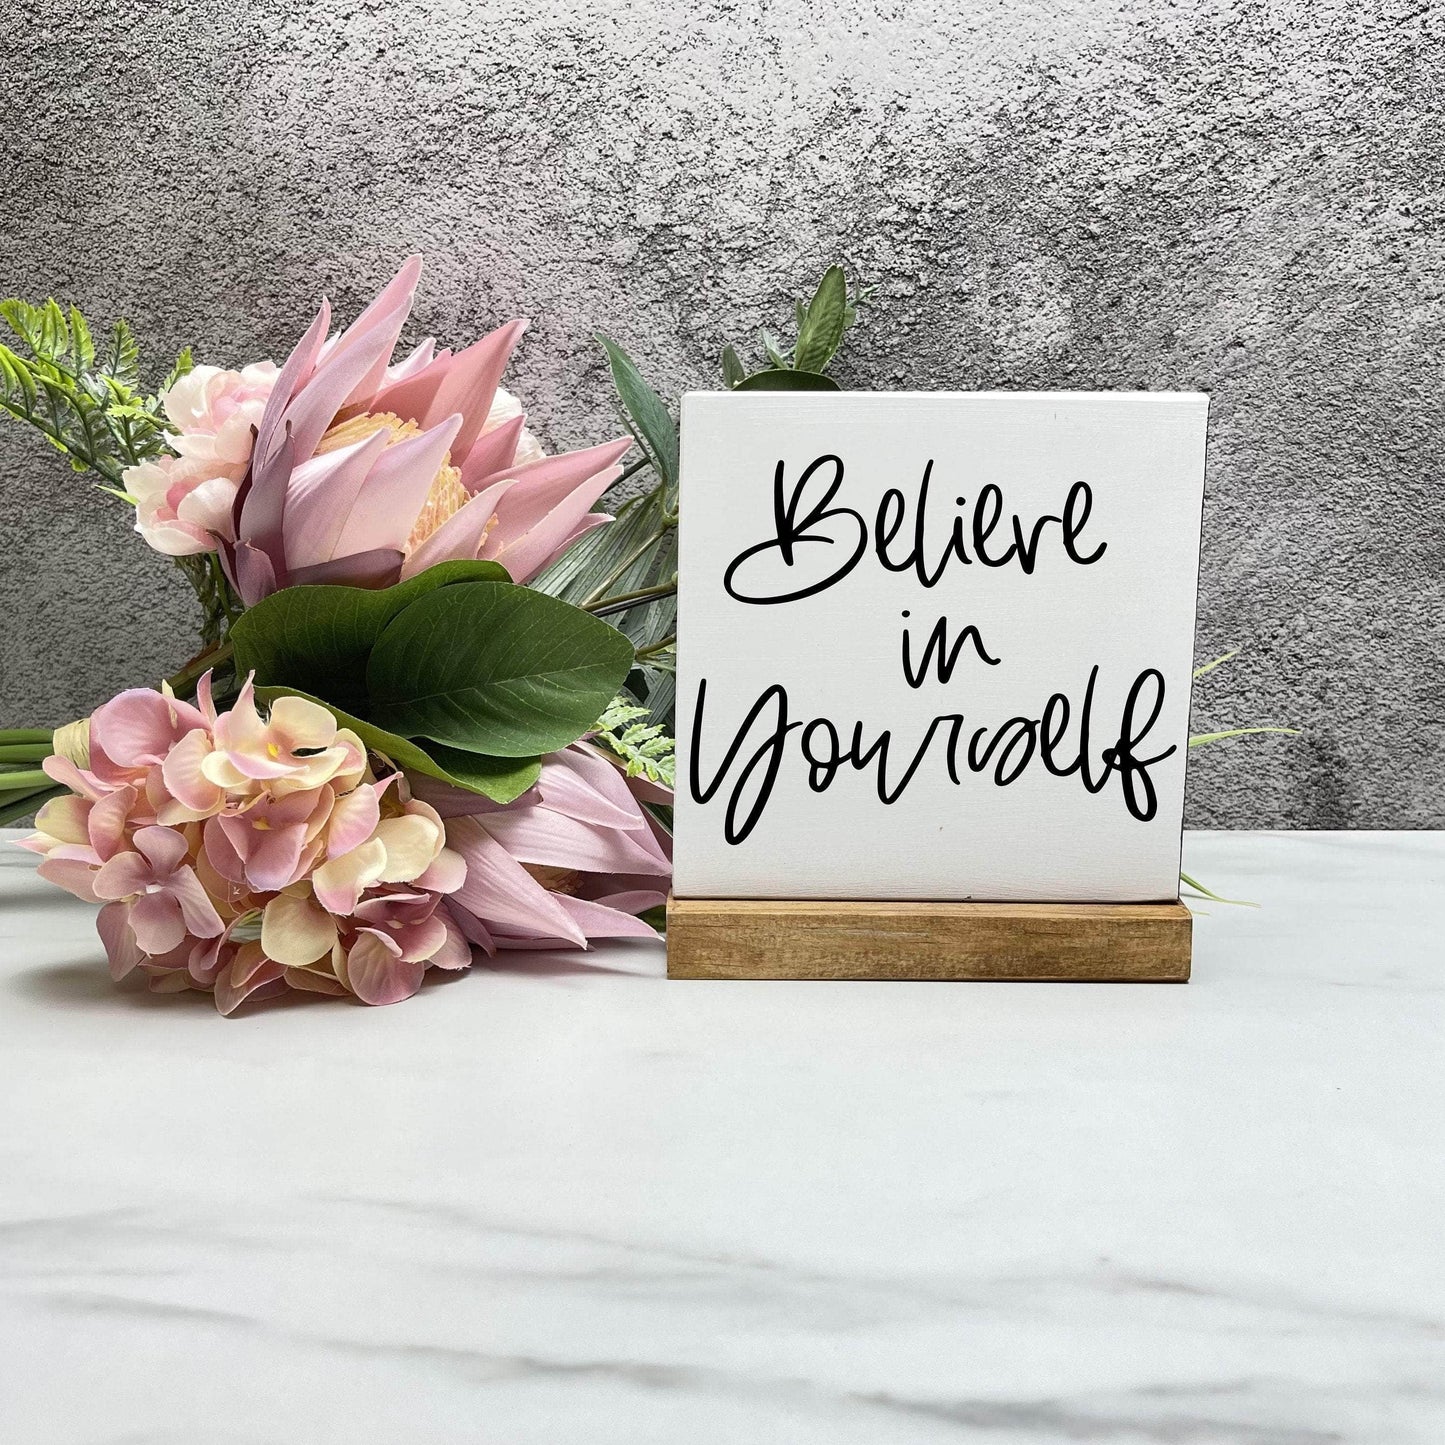 Believe in yourself  wood sign, quote sign, rustic decor, home decor